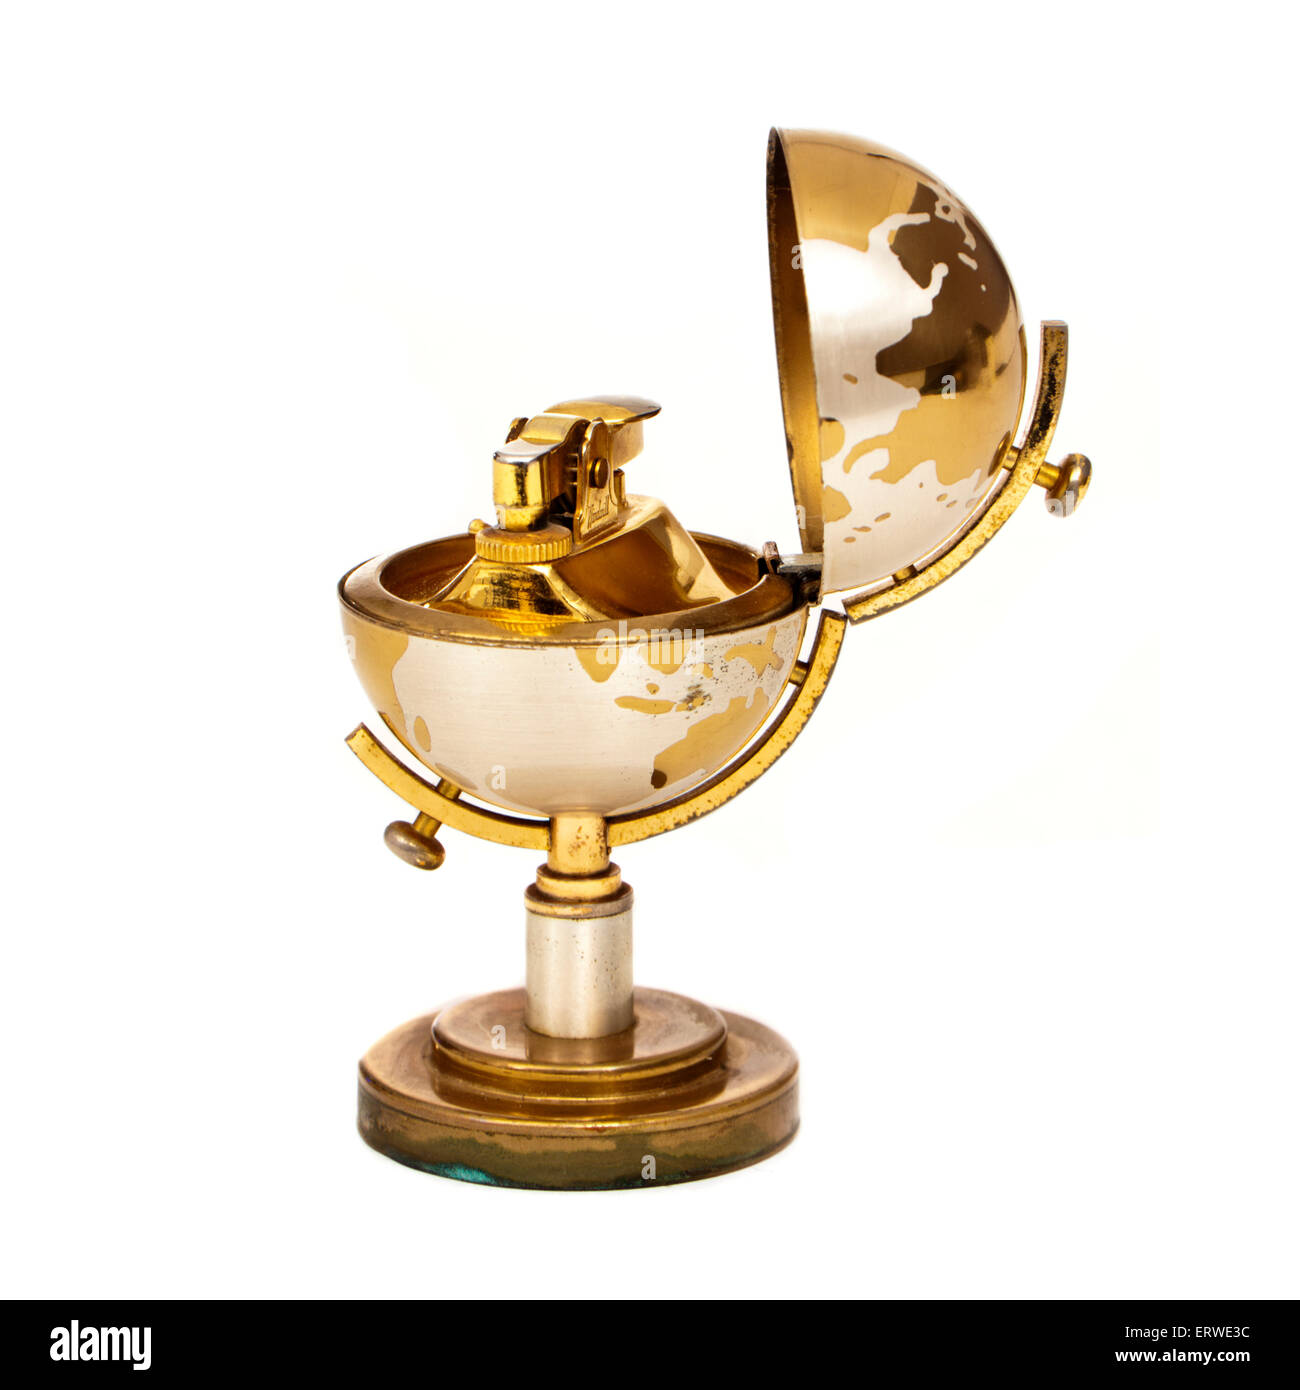 Vintage 1950's PollyGAZ 'Windmill' cigarette lighter in the form of a terrestrial globe. Stock Photo